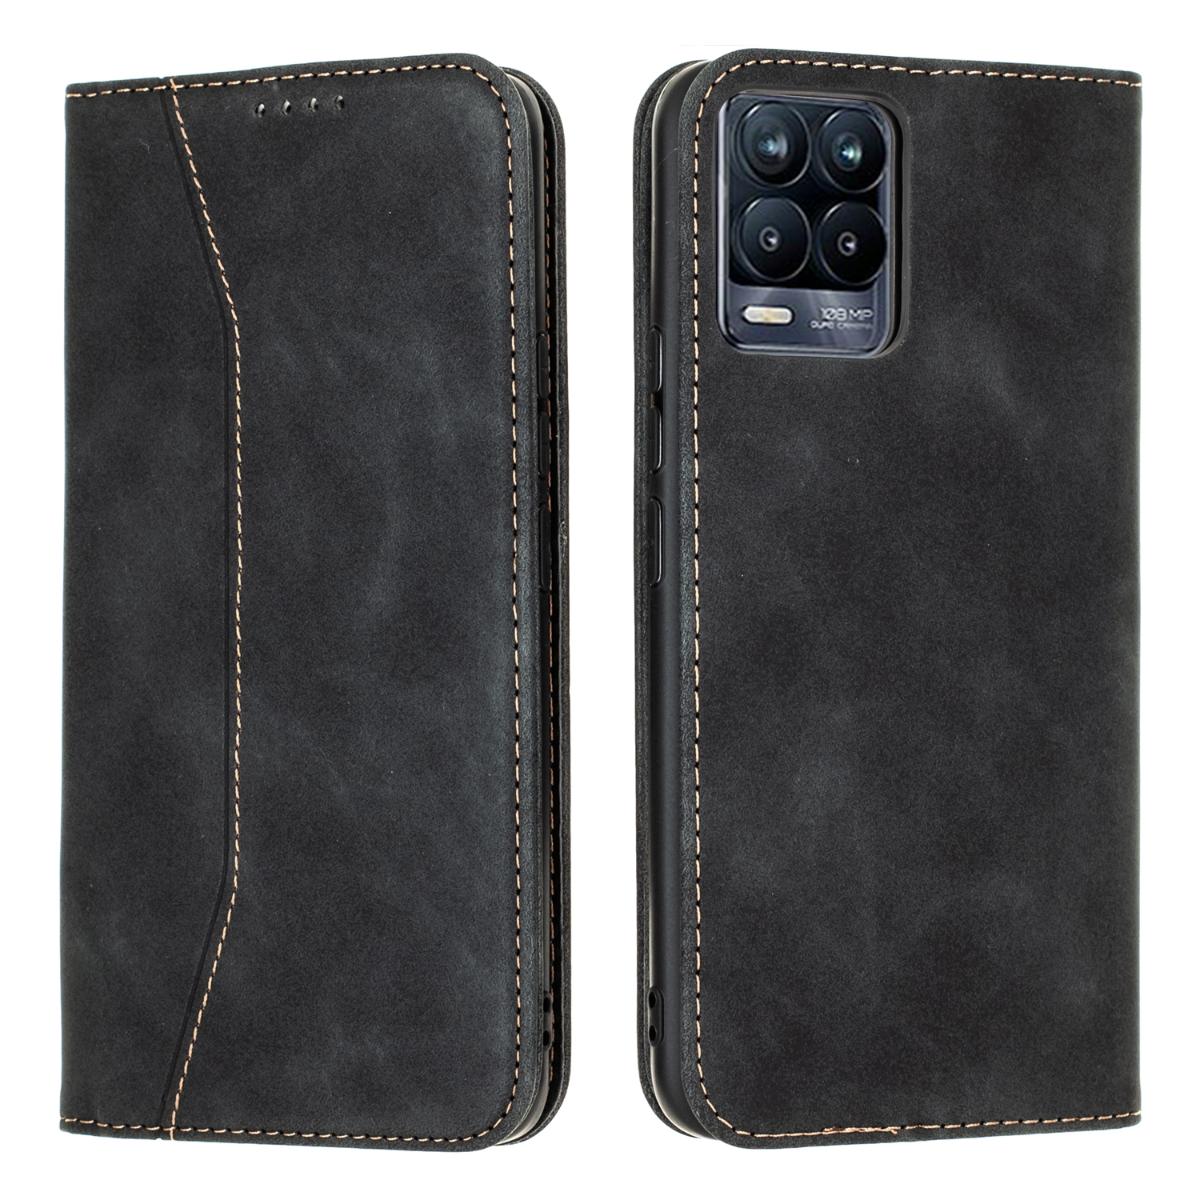 Bodycell Bodycell Book Case Pu Leather For Realme 8/8 Pro Black (04-00695)